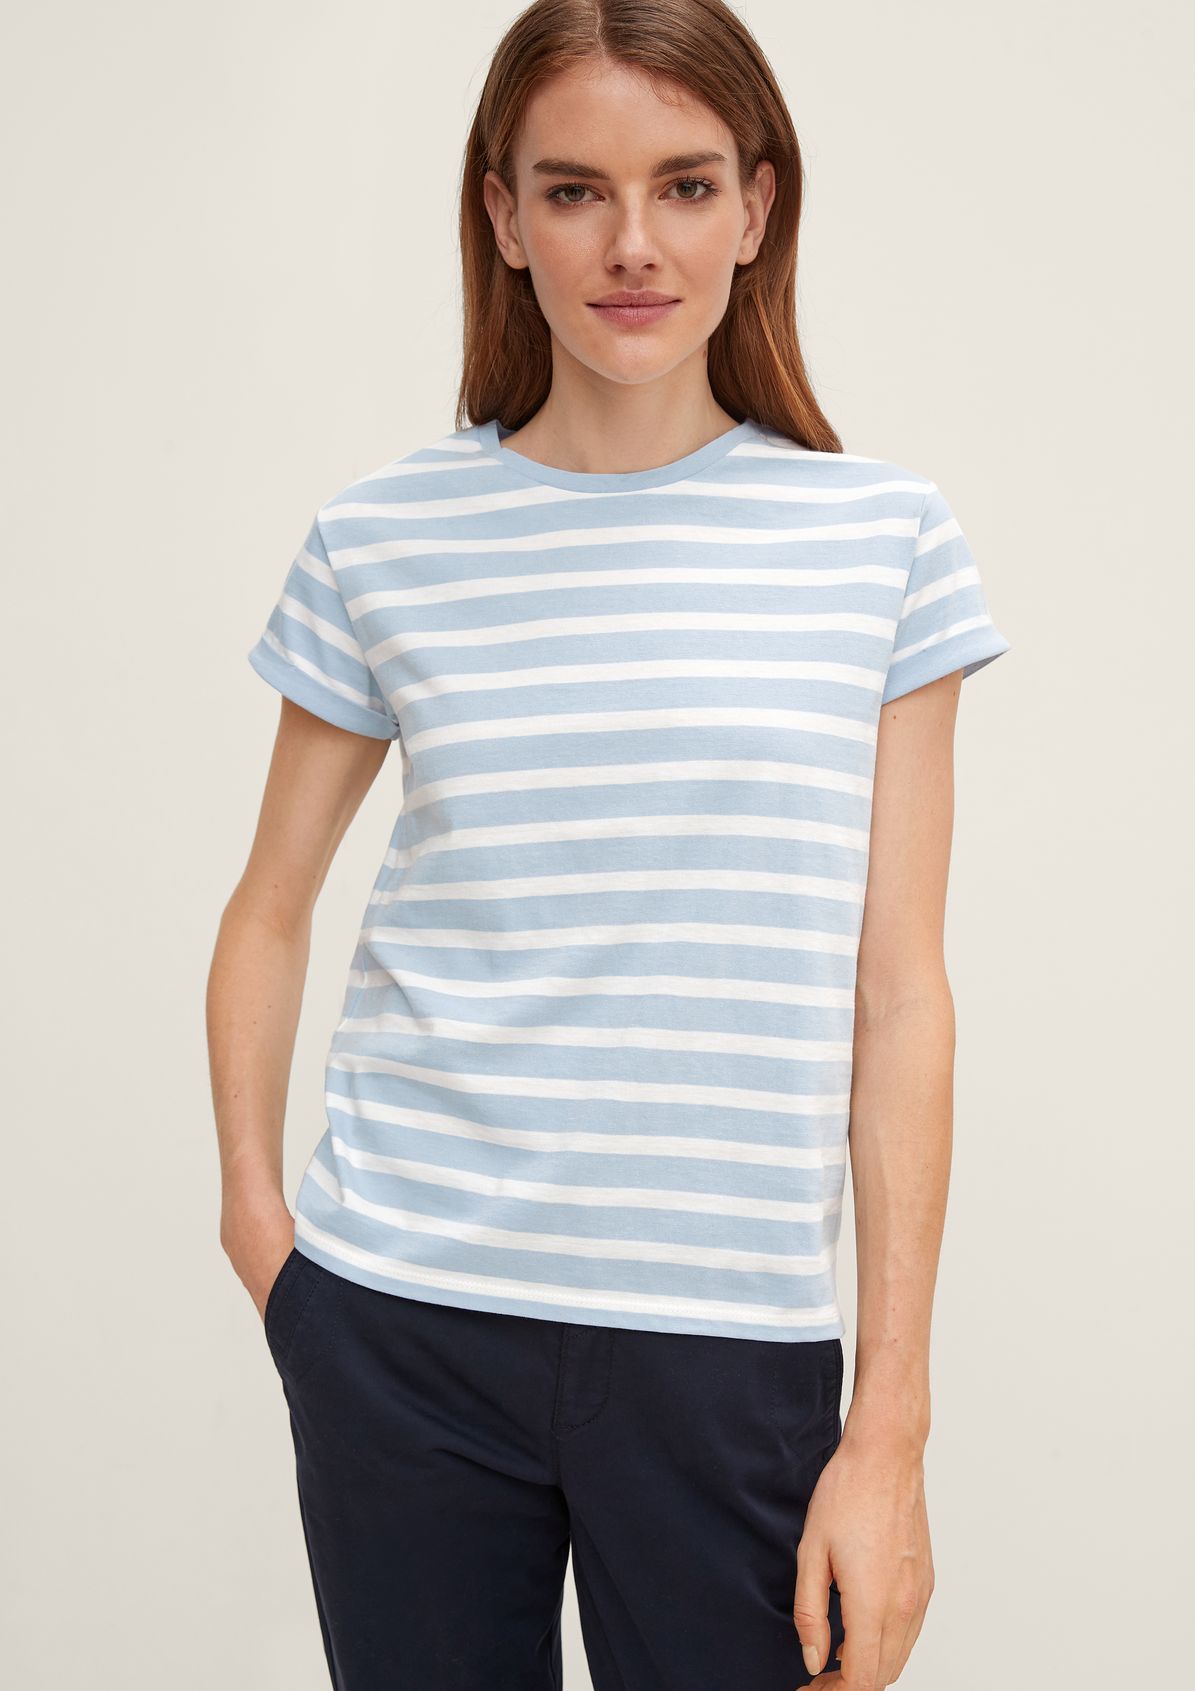 Cotton jersey top from comma